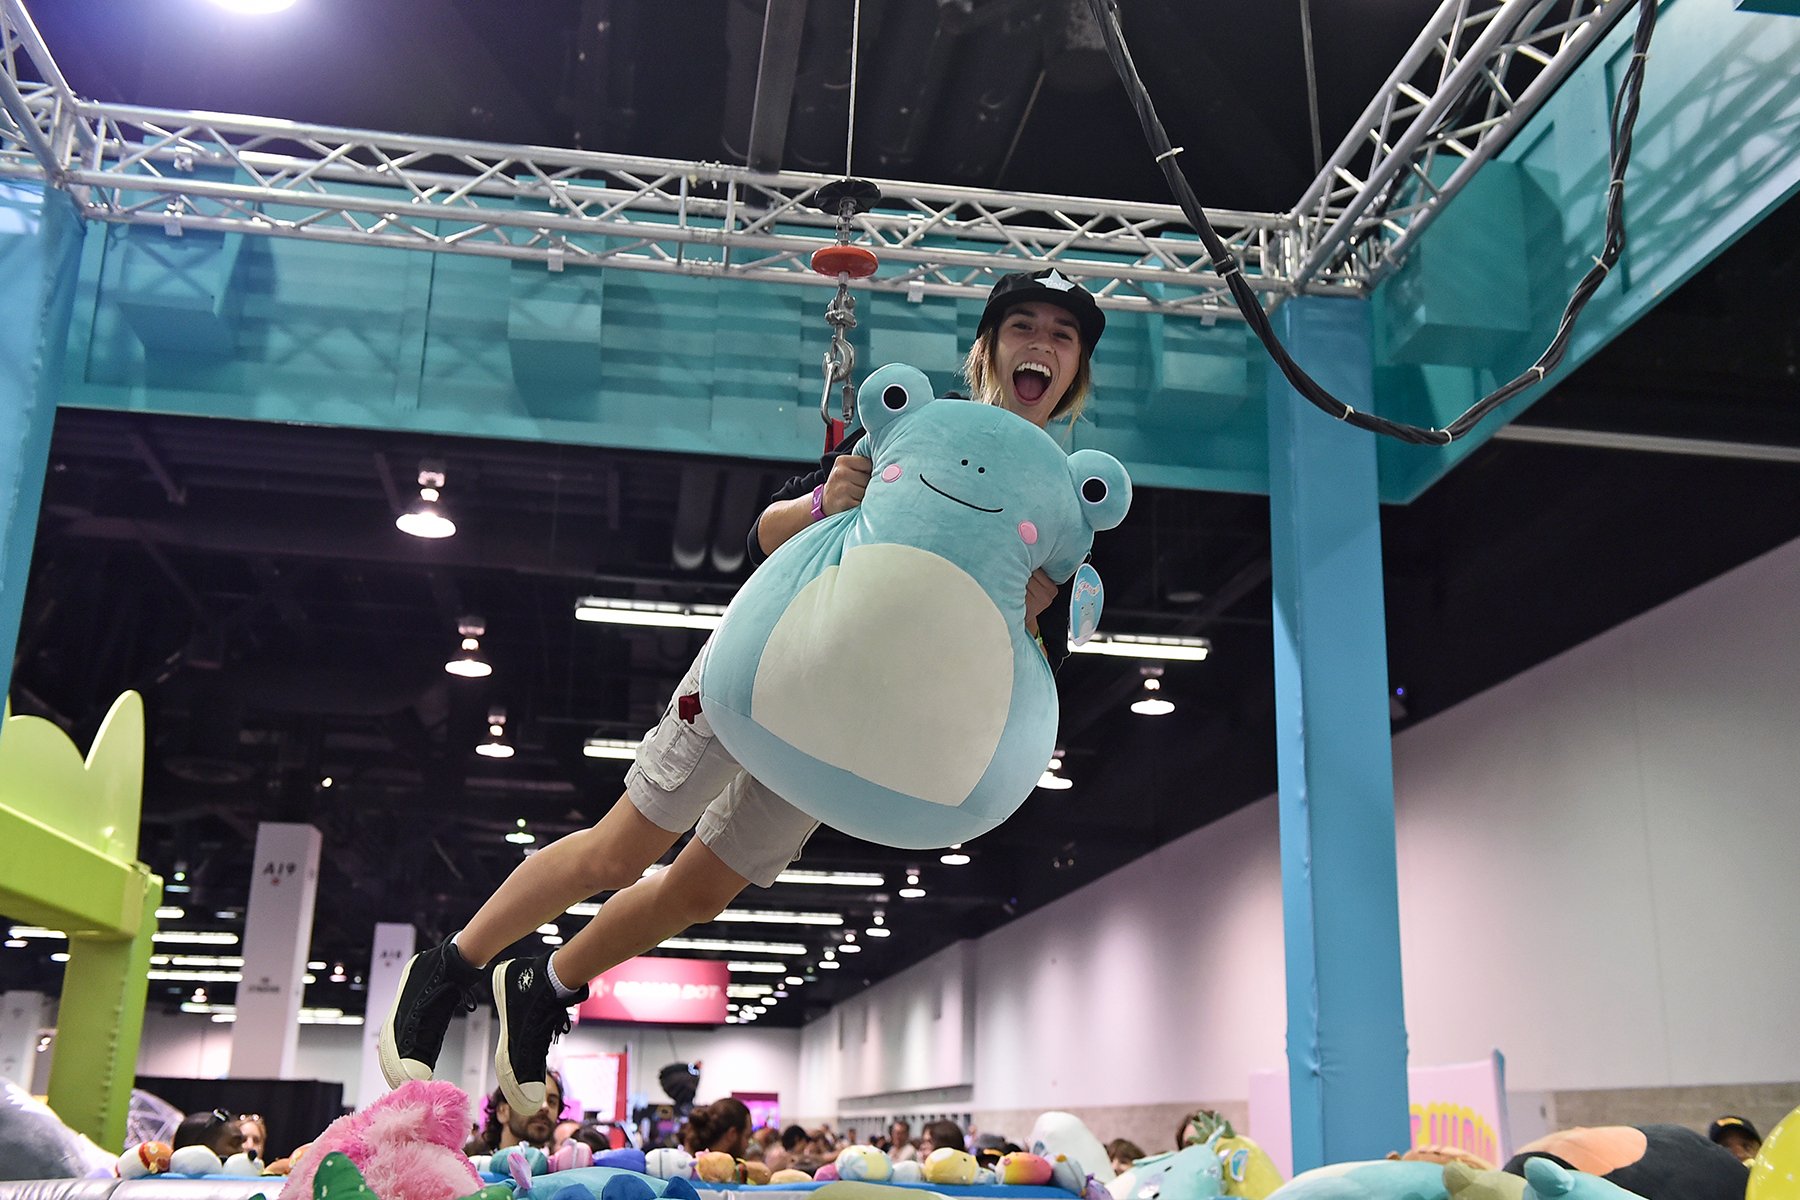 VidCon 2022 Was a Candy-Colored, Covid-Spreading, Content-Creating Extravaganza